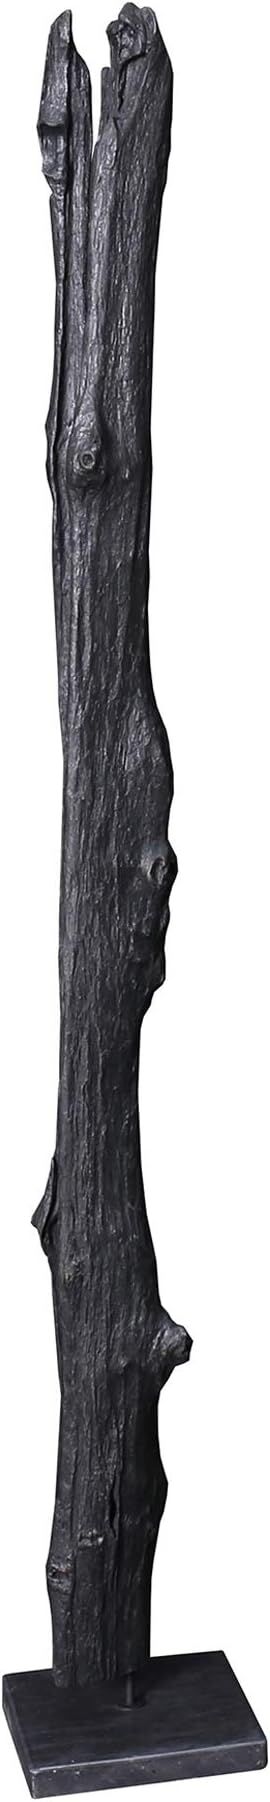 Moe's Home Collection Tall Teak Wood Sculpture, Grey | Amazon (US)